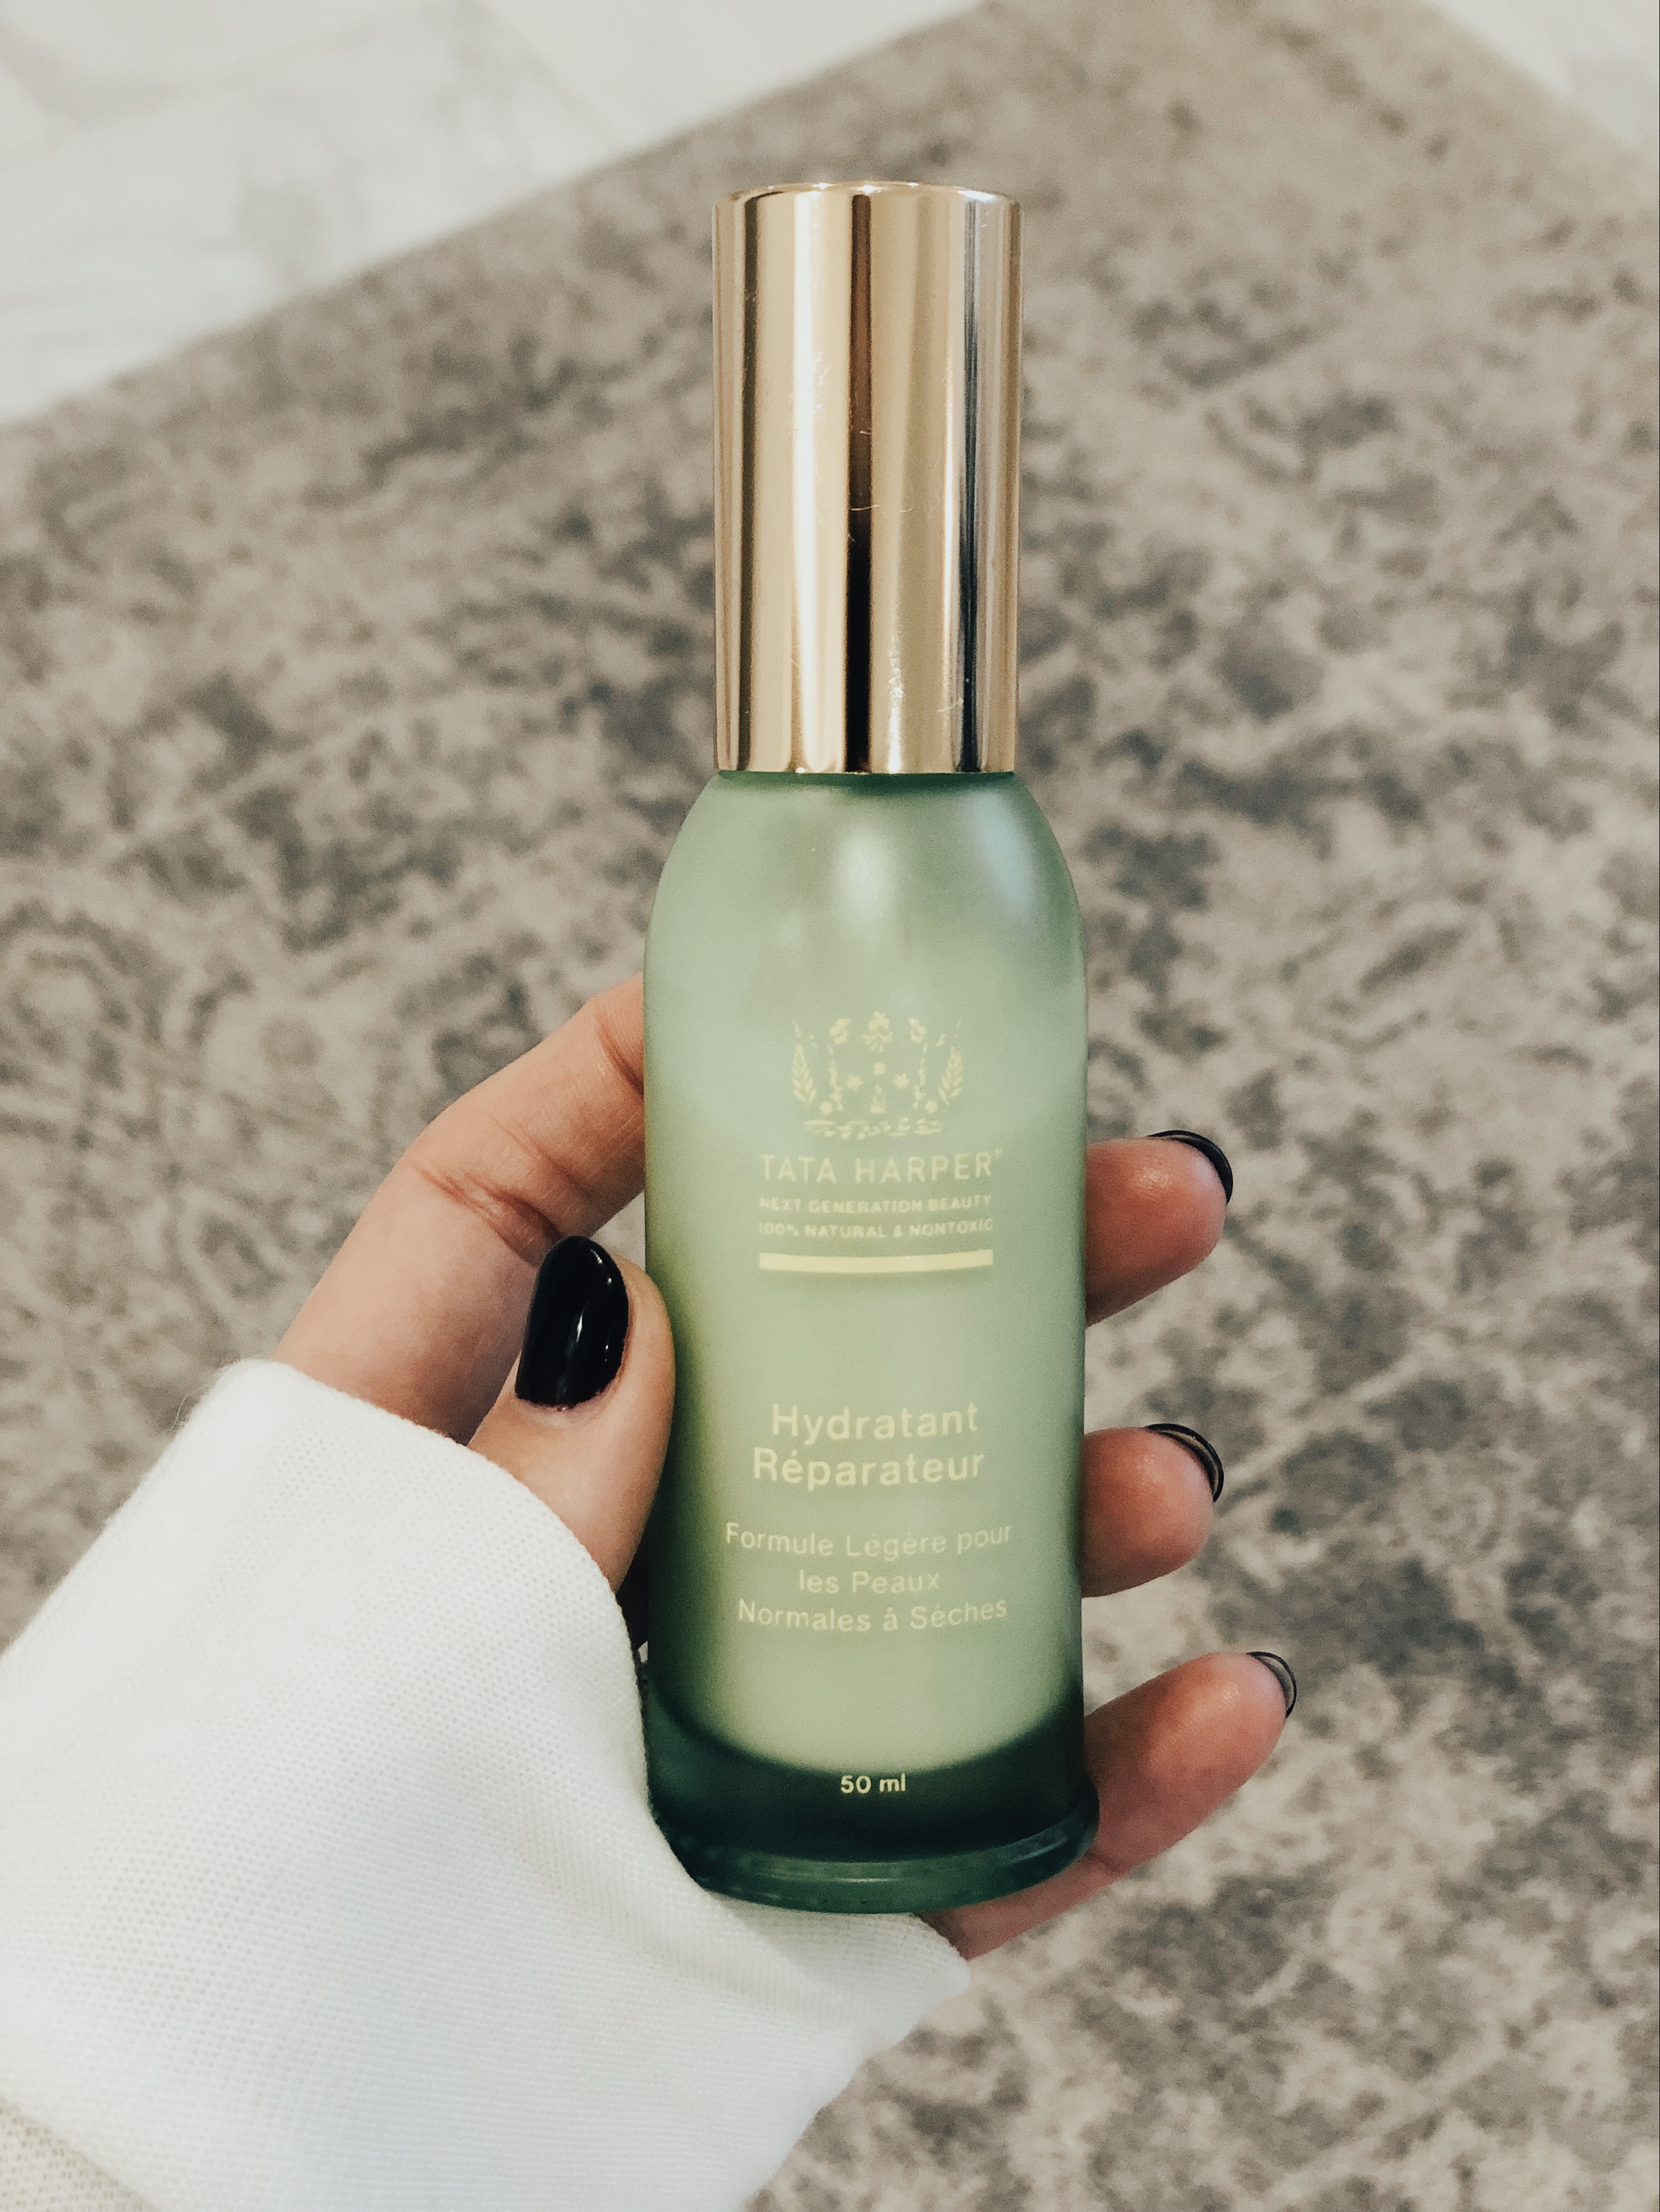 Reno Nevada Blogger, Emily Farren Wieczorek, of Two Peas in a Prada shares her holy grail favorite skincare products.